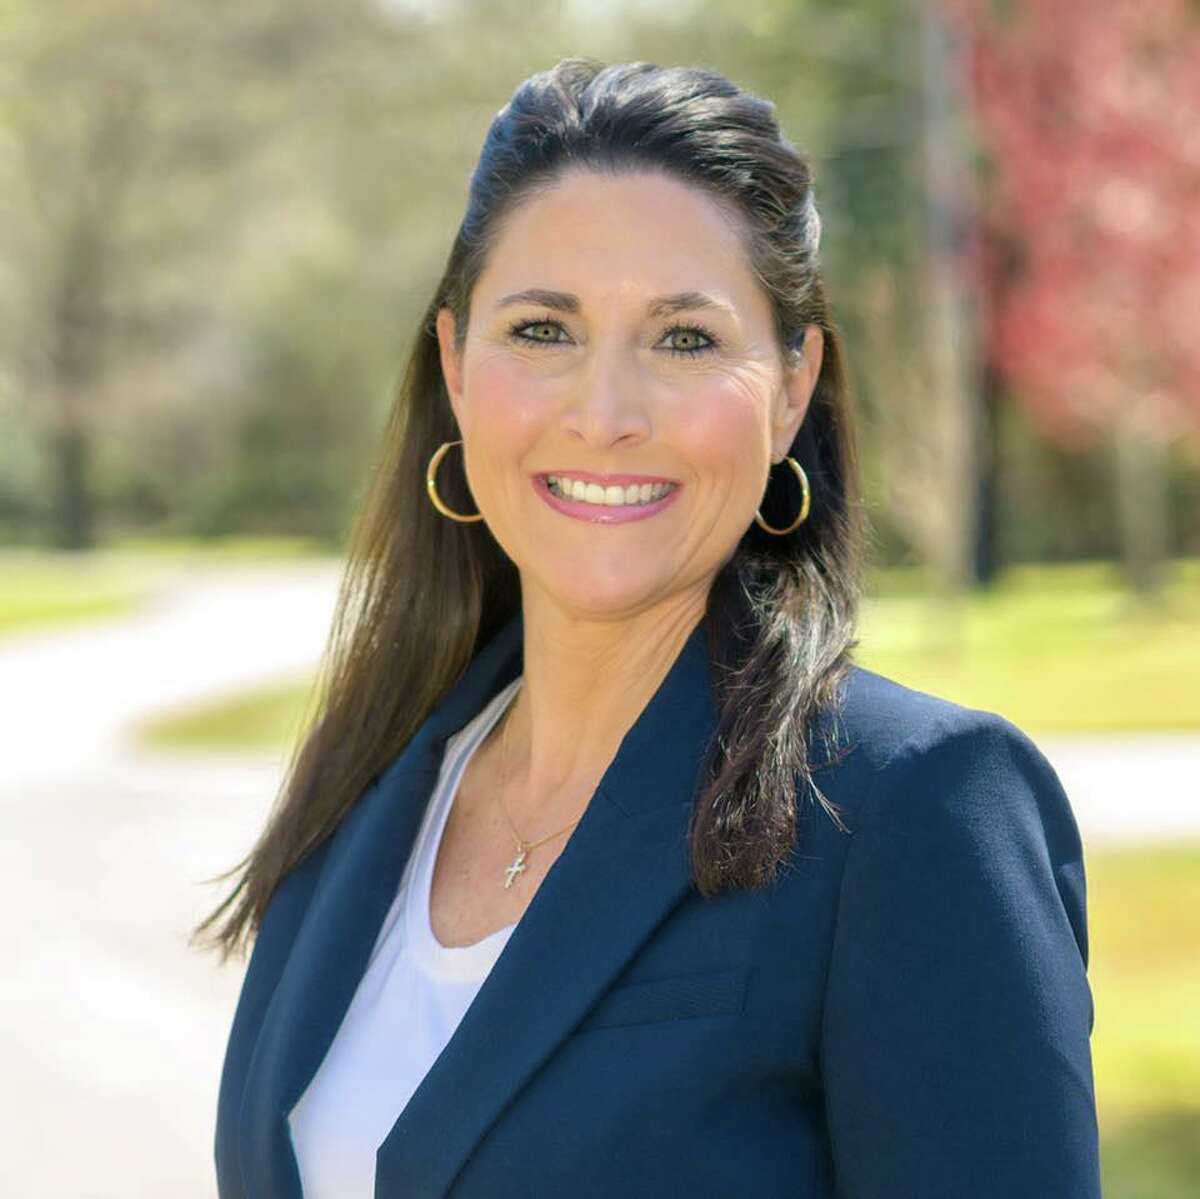 Caroline Bennett won the May 7 election for Position 7 on the Spring Branch ISD Board of Trustees and will be sworn in on May 17 for a three-year term.